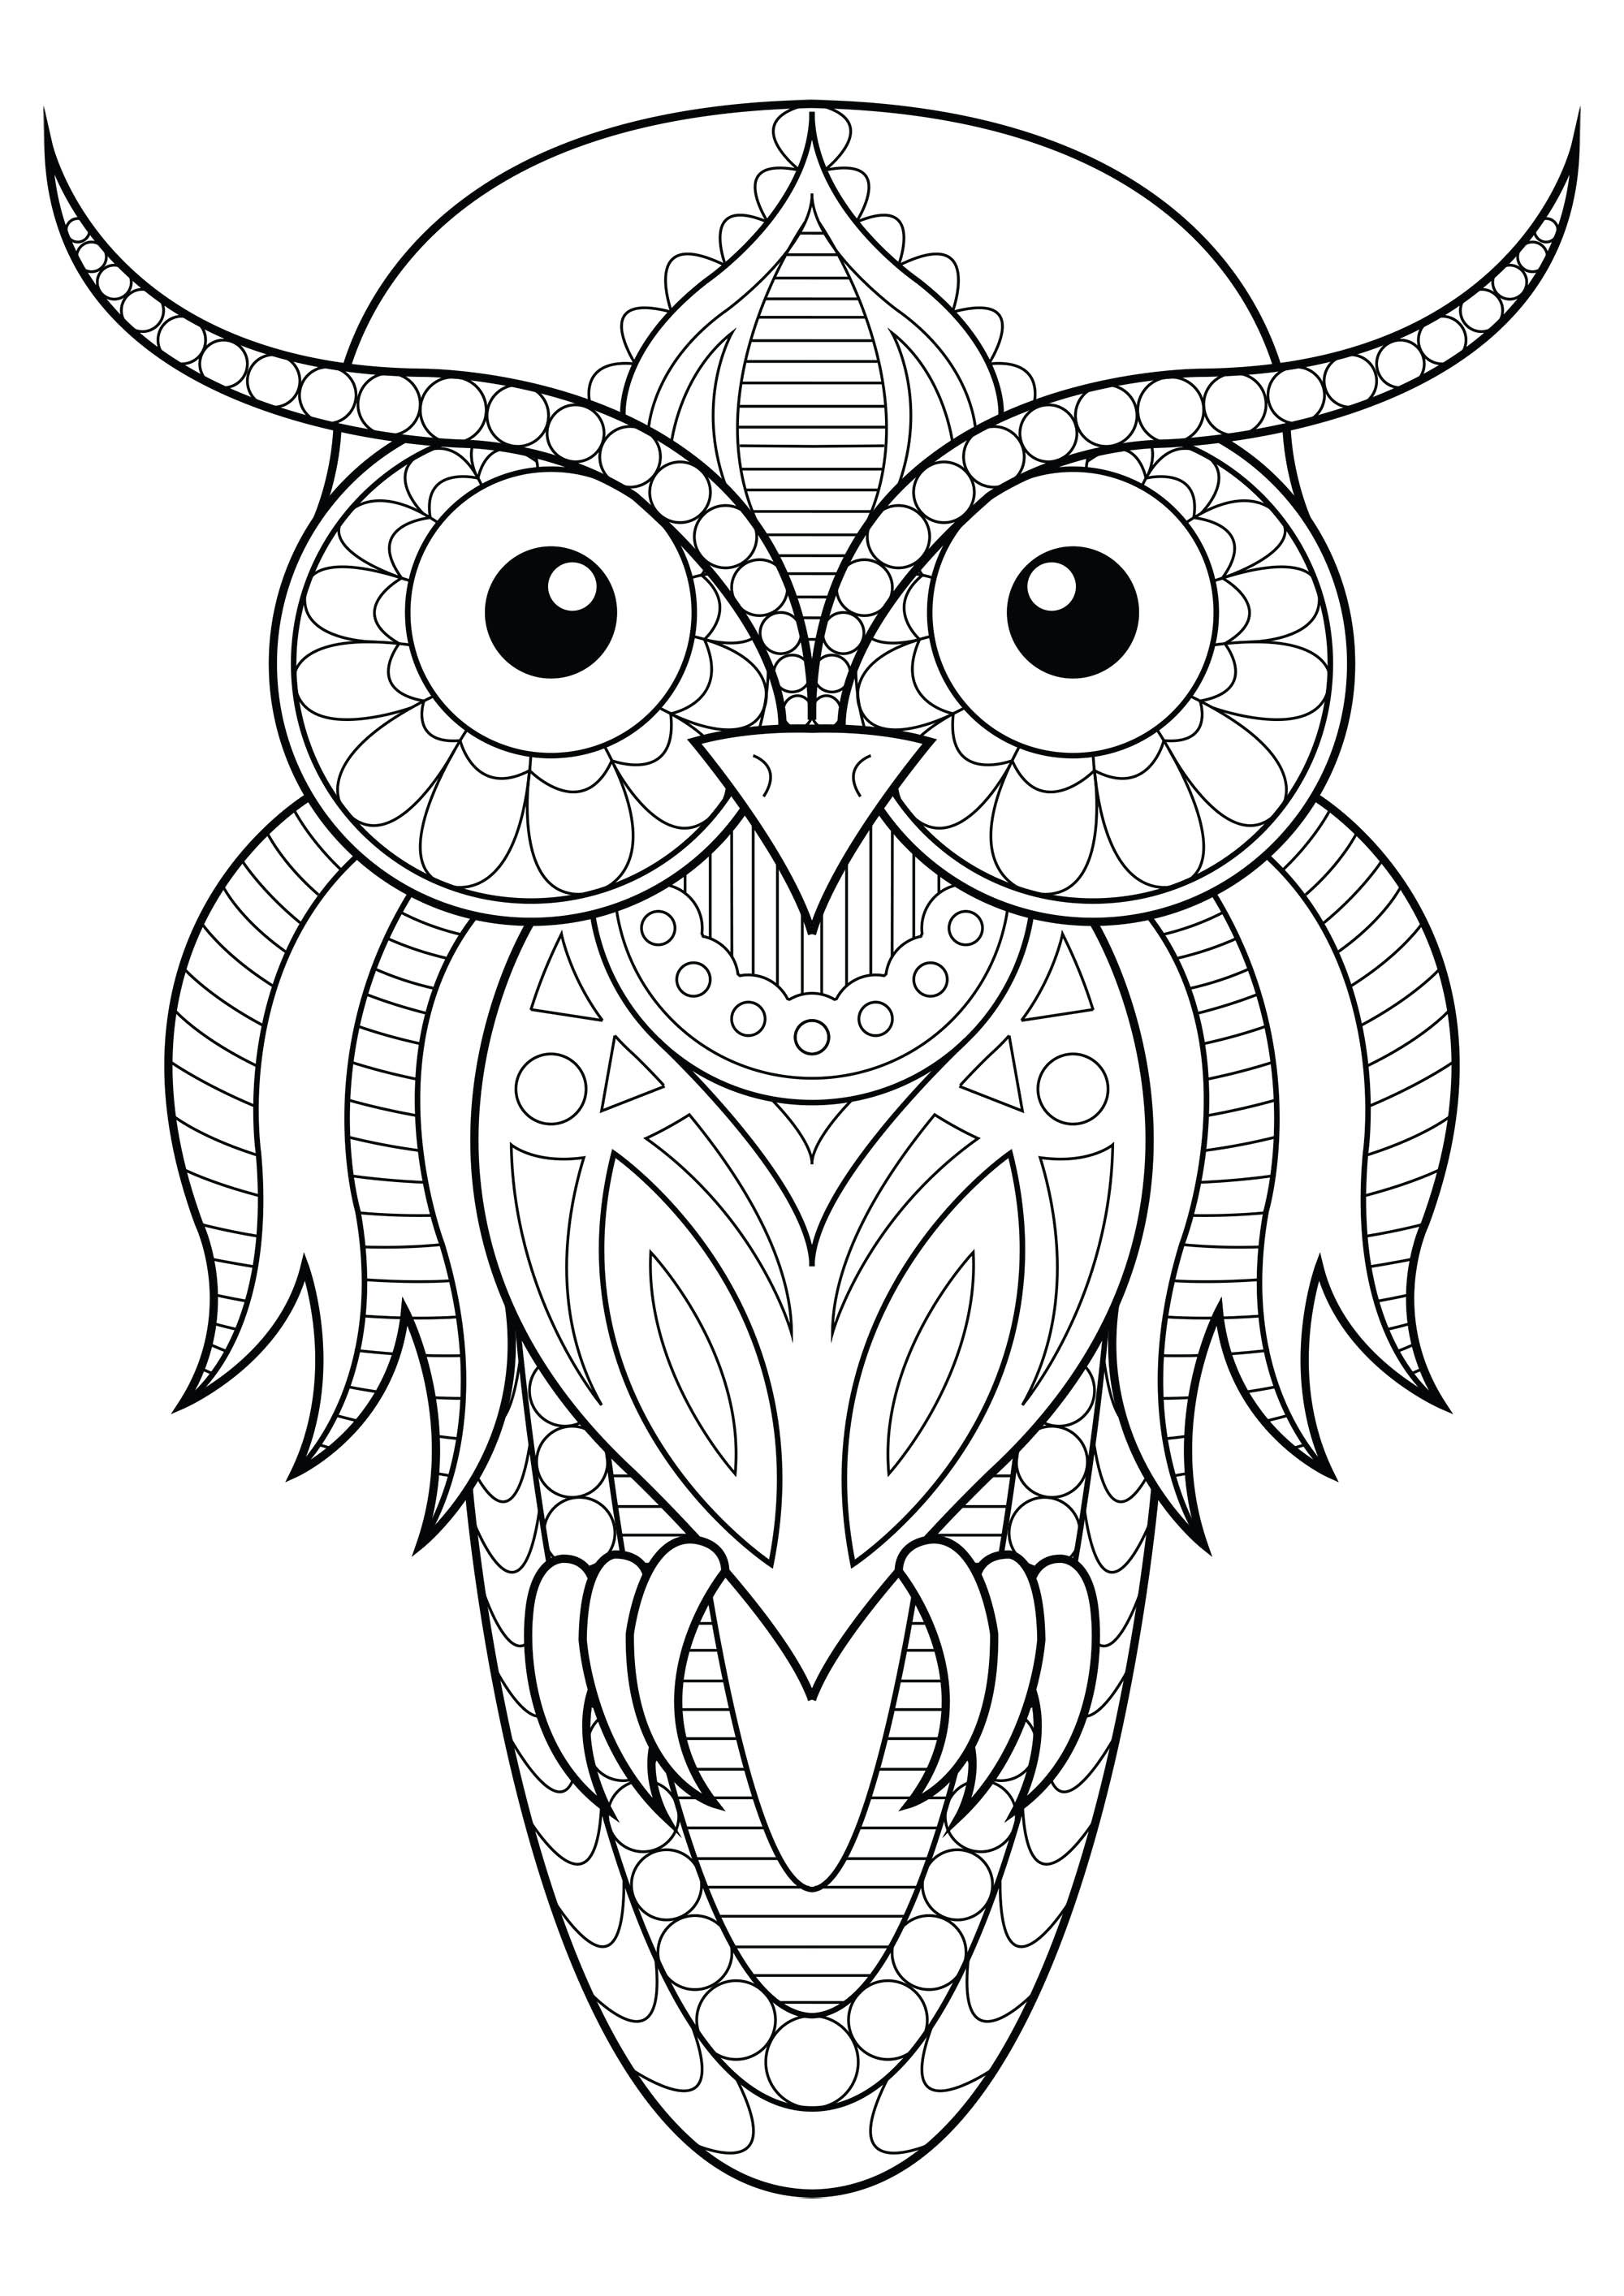 Owl simple patterns 1 Owls Adult Coloring Pages